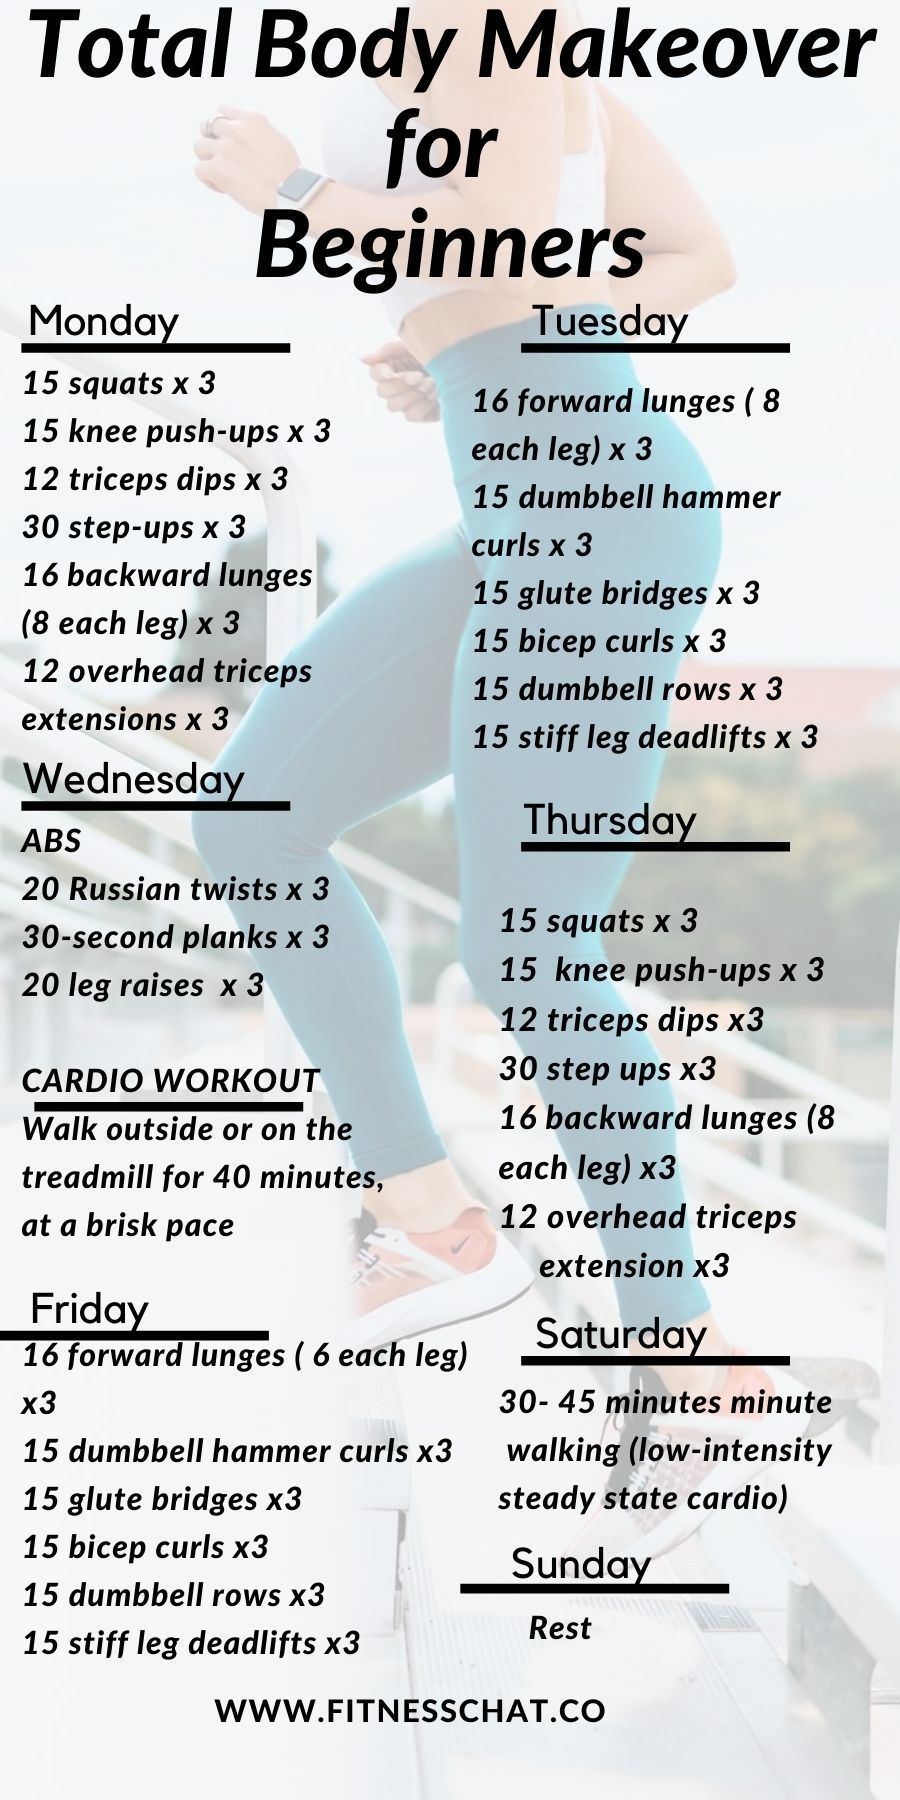 morning workout routine at home - morning workout routine at home -   18 workouts for beginners at home ideas